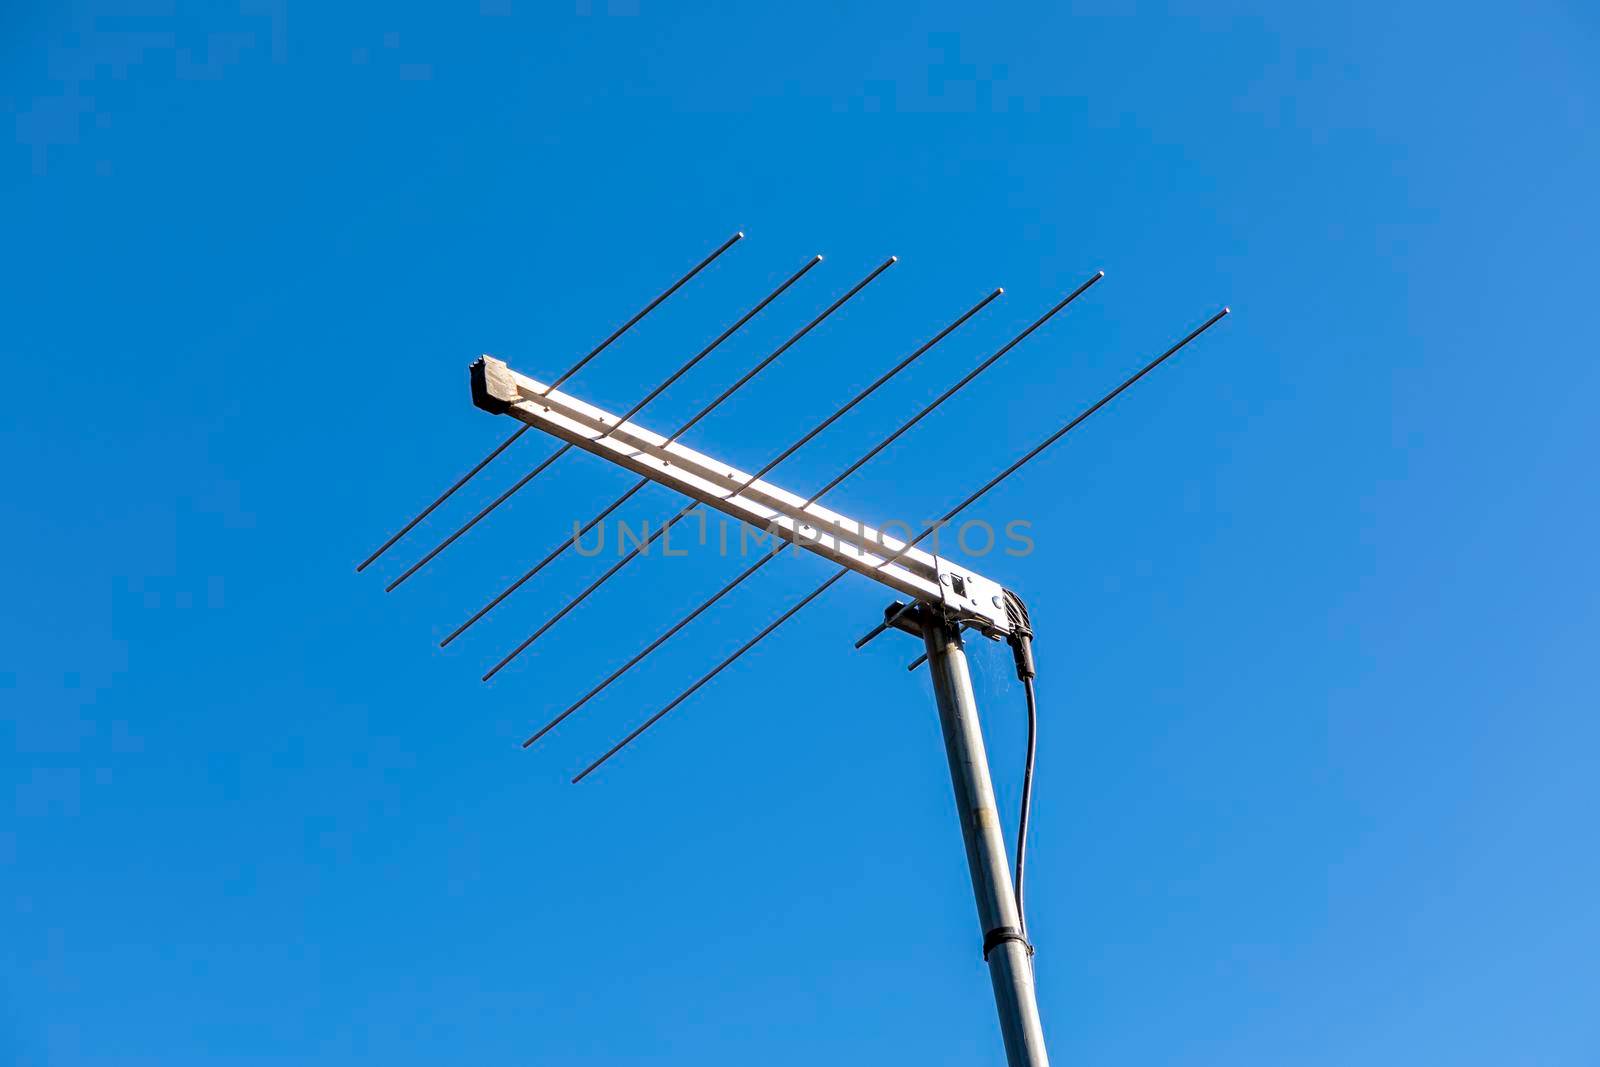 A television antenna against a blue sky background by WittkePhotos